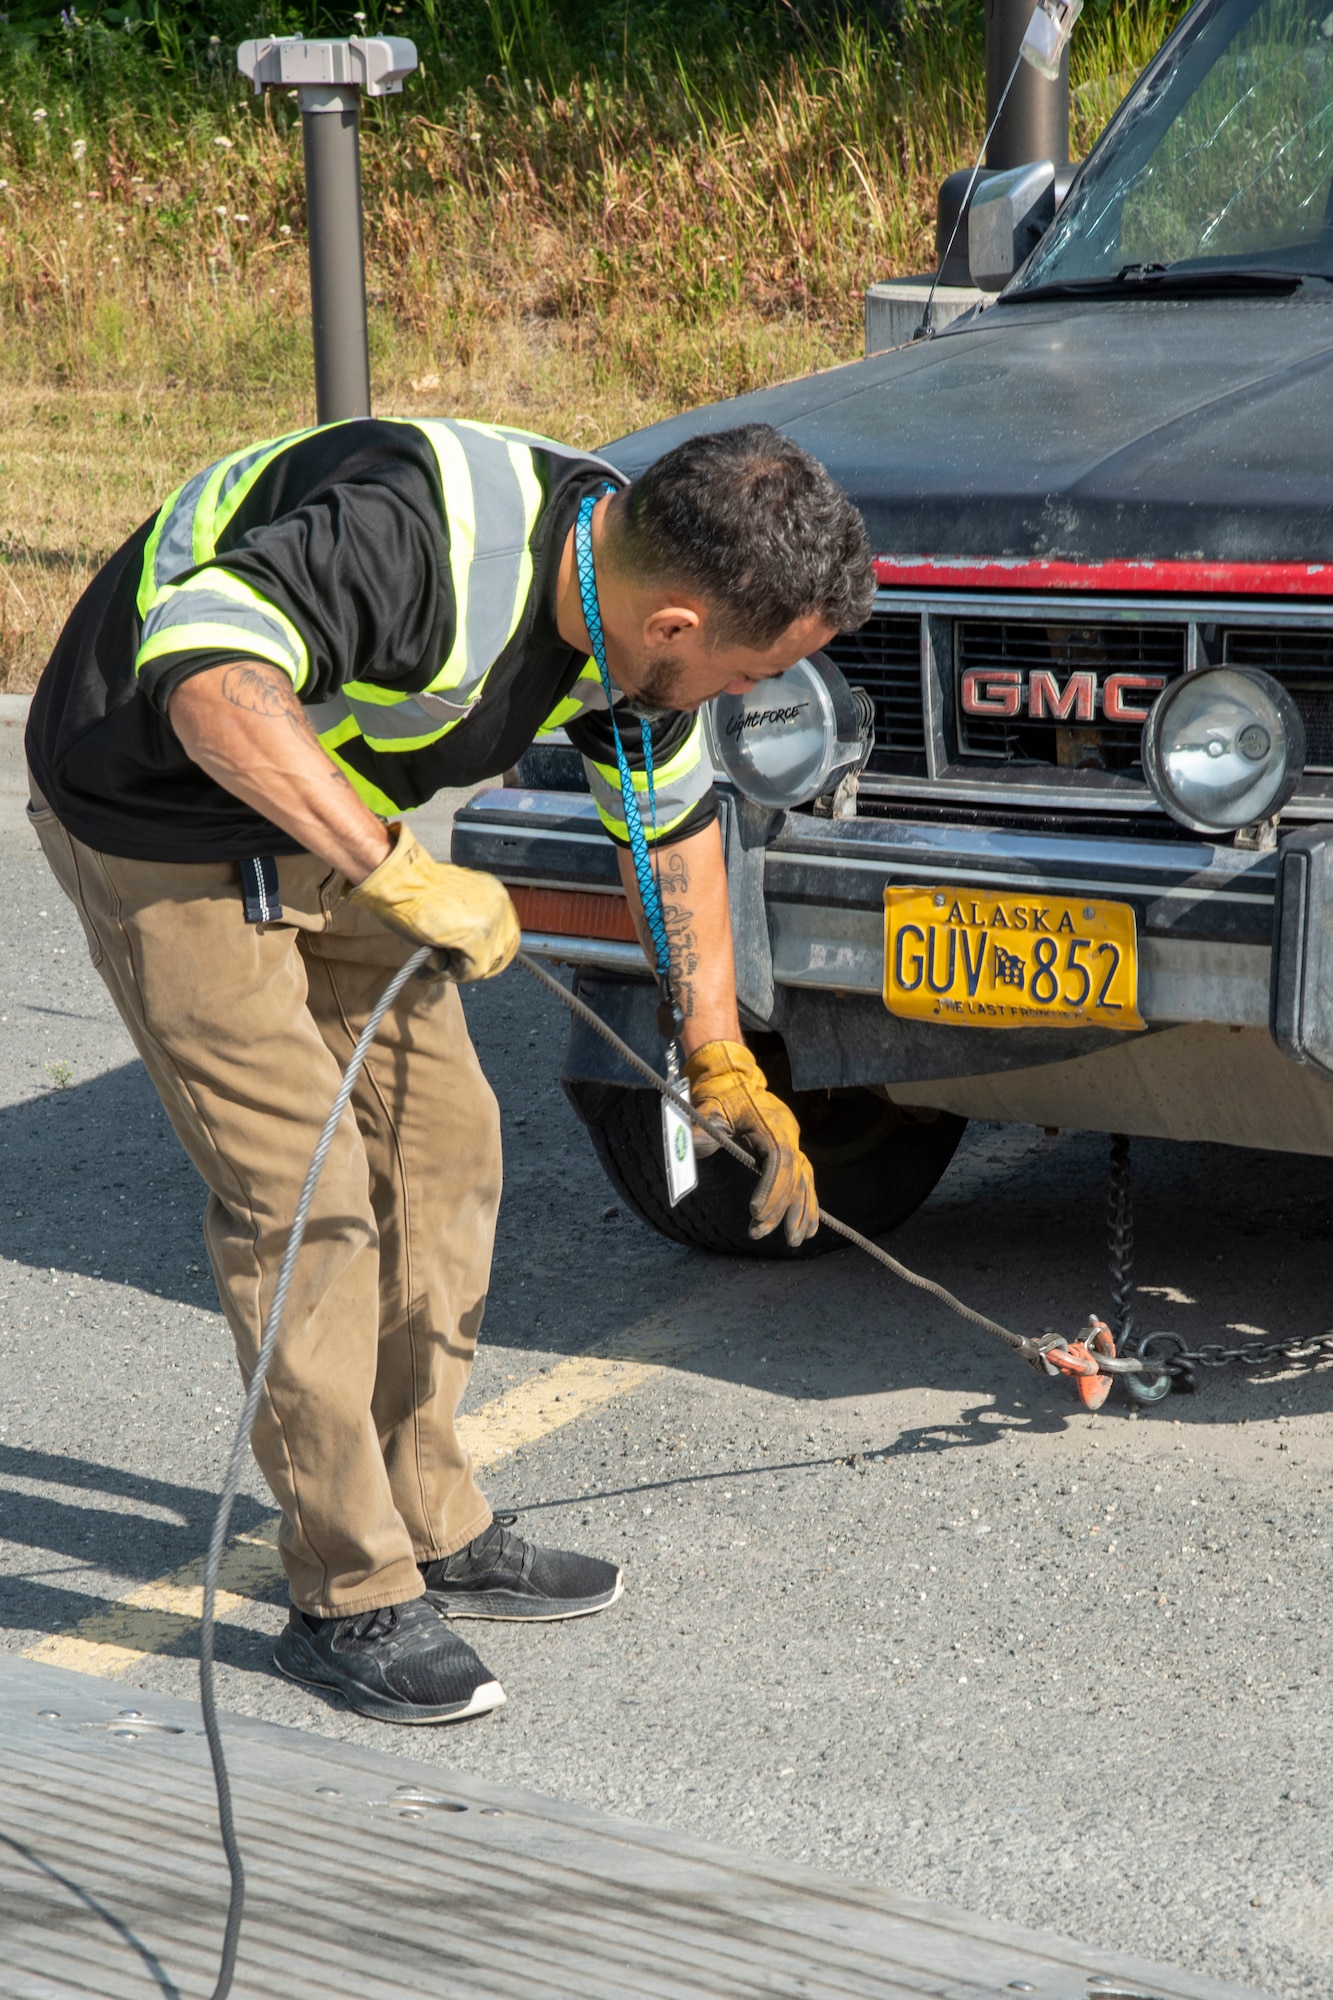 Edison Minyatty, an assistant tow truck operator with JT Towing LLC, adjusts chains attached to a vehicle July 1, 2019, on Joint Base Elmendorf-Richardson, Alaska. Abandoned and illegally parked vehicles on Joint Base Elmendorf-Richardson, Alaska, are towed because they present safety hazards.